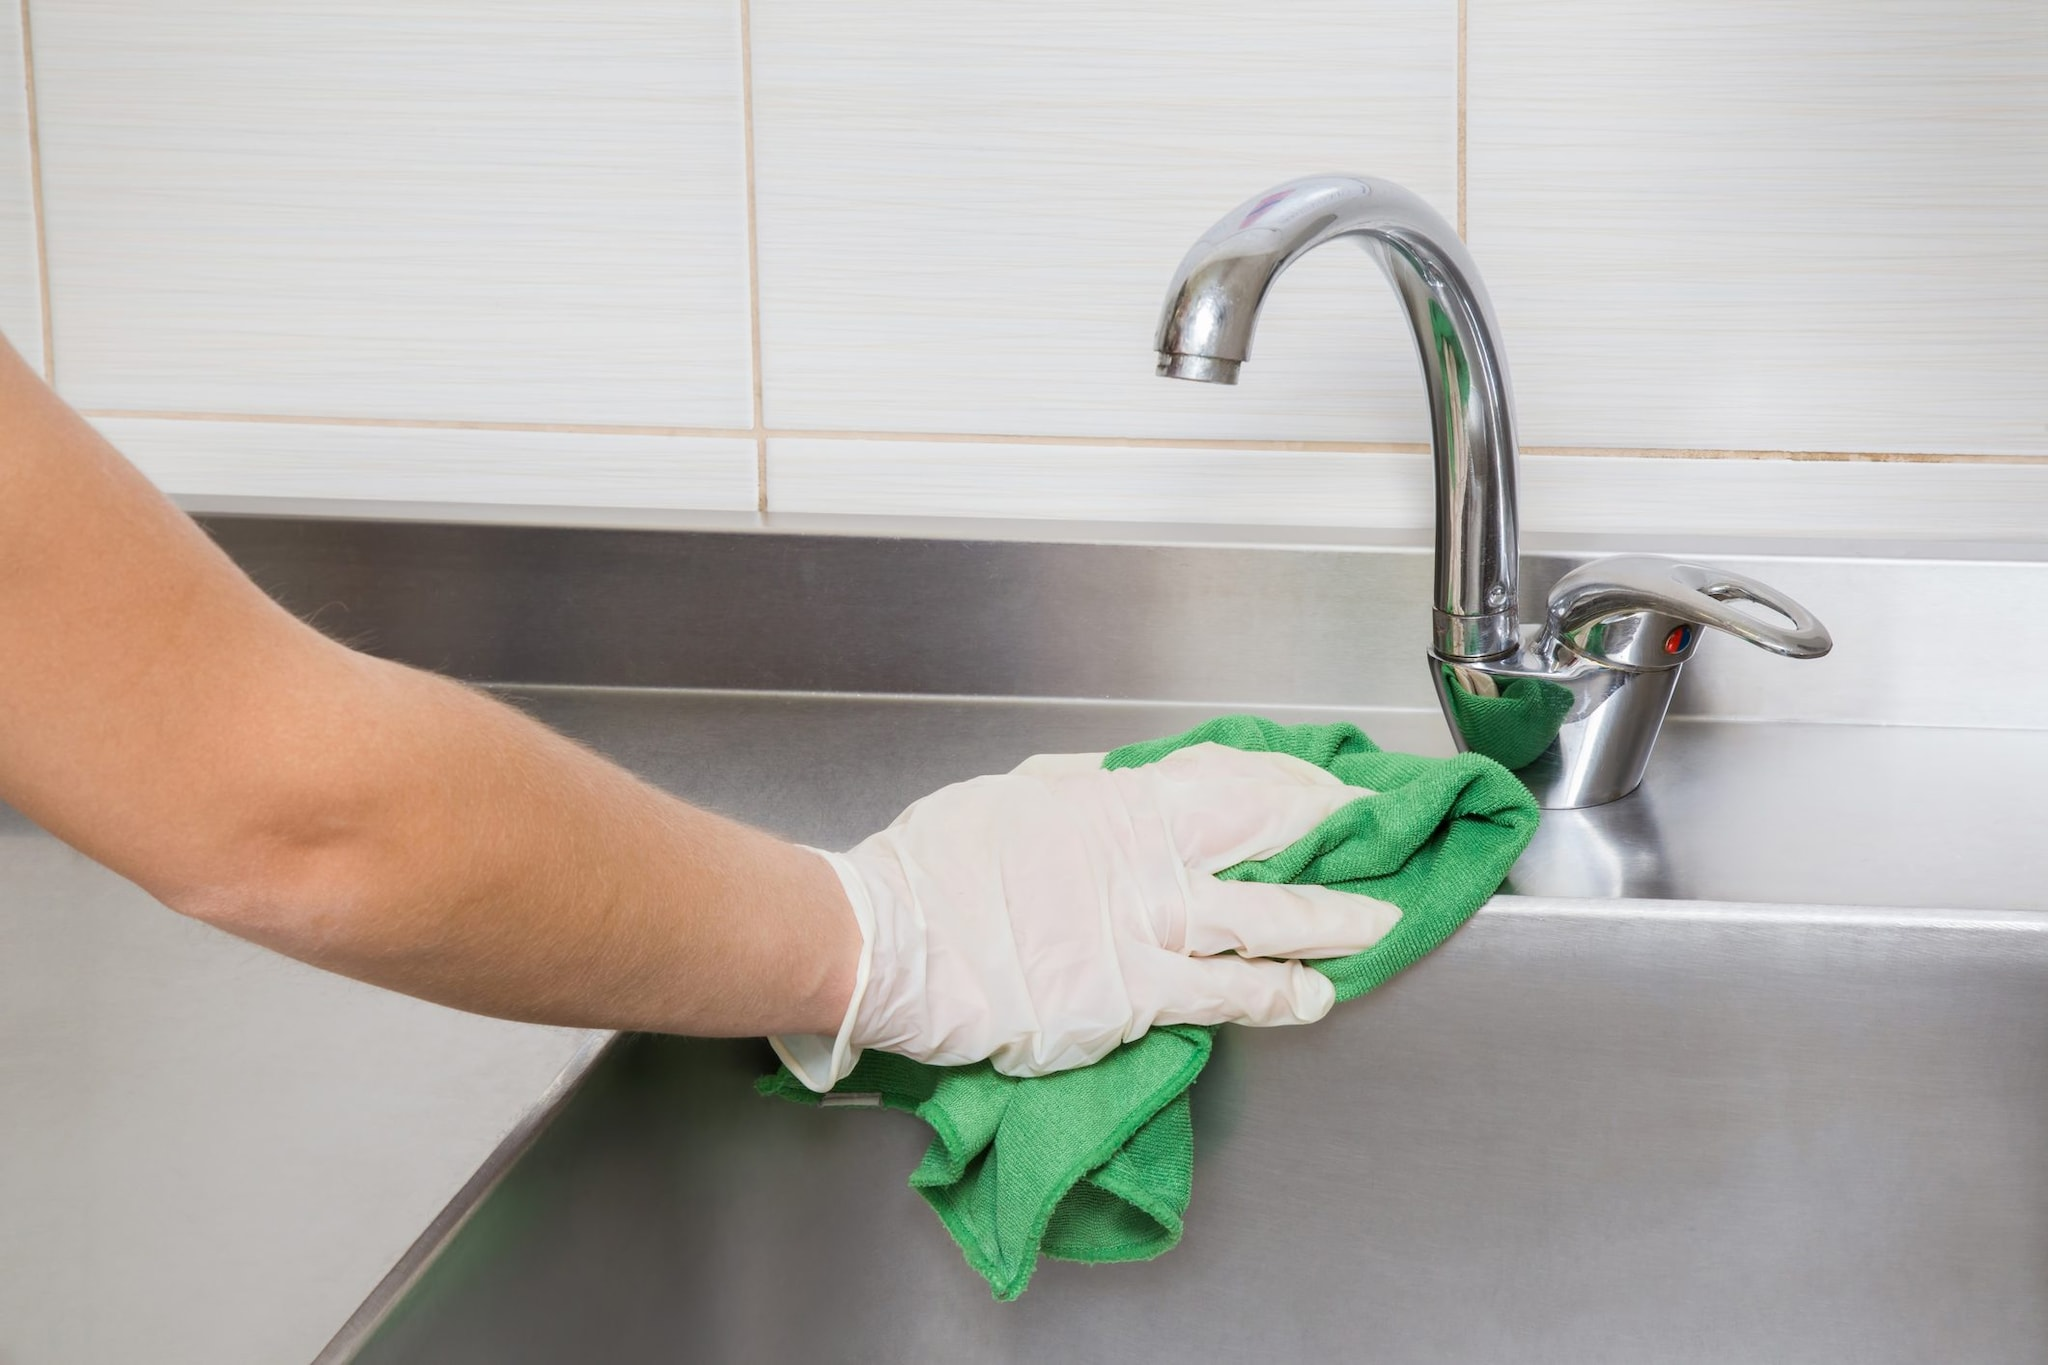 Avoid using greasy cloths when cleaning stainless steel sink